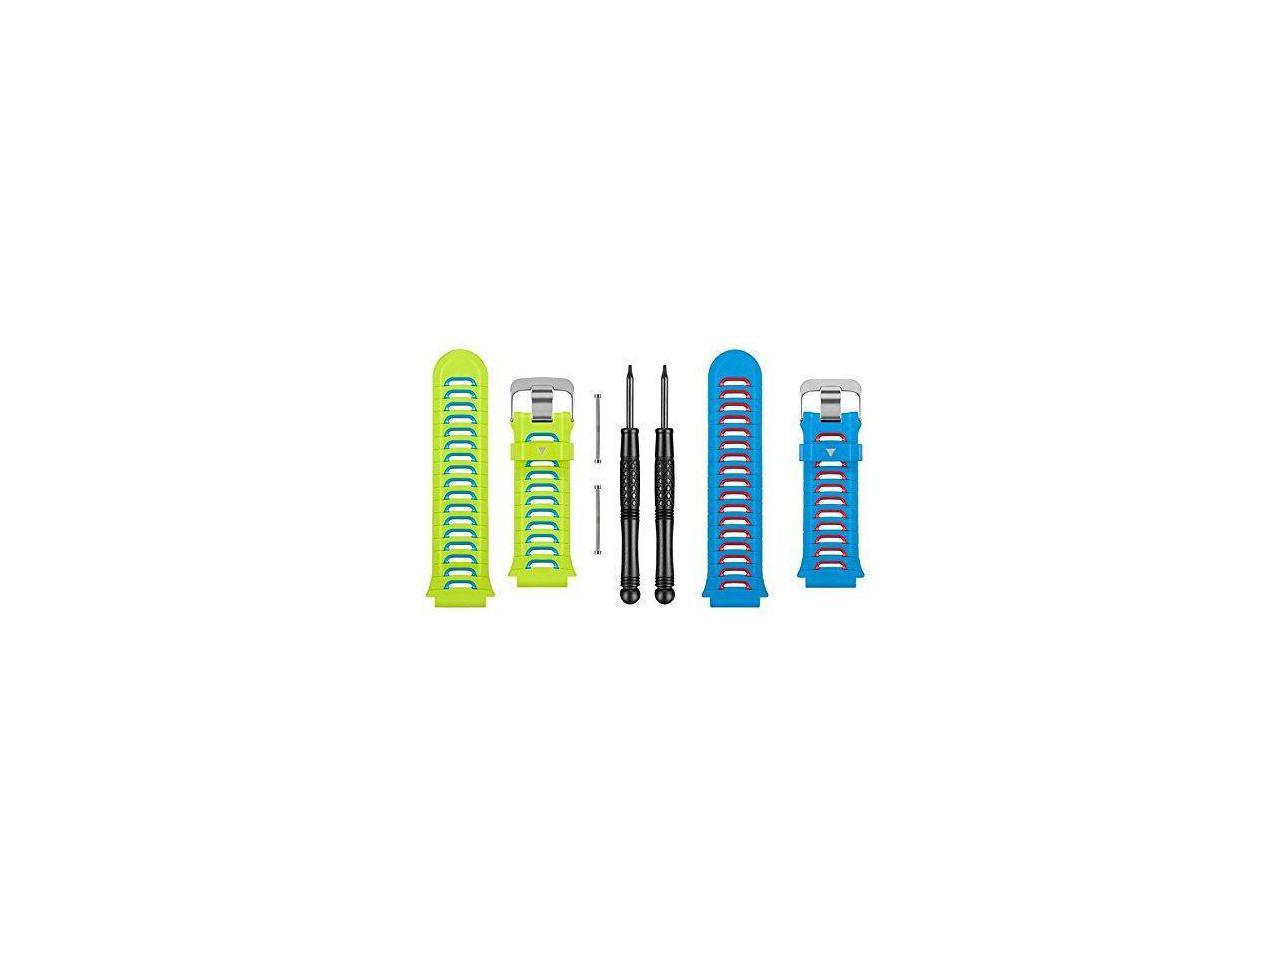 Garmin Accessory Band Kit Green Blue and Blue Red Wrist Bands for 920XT